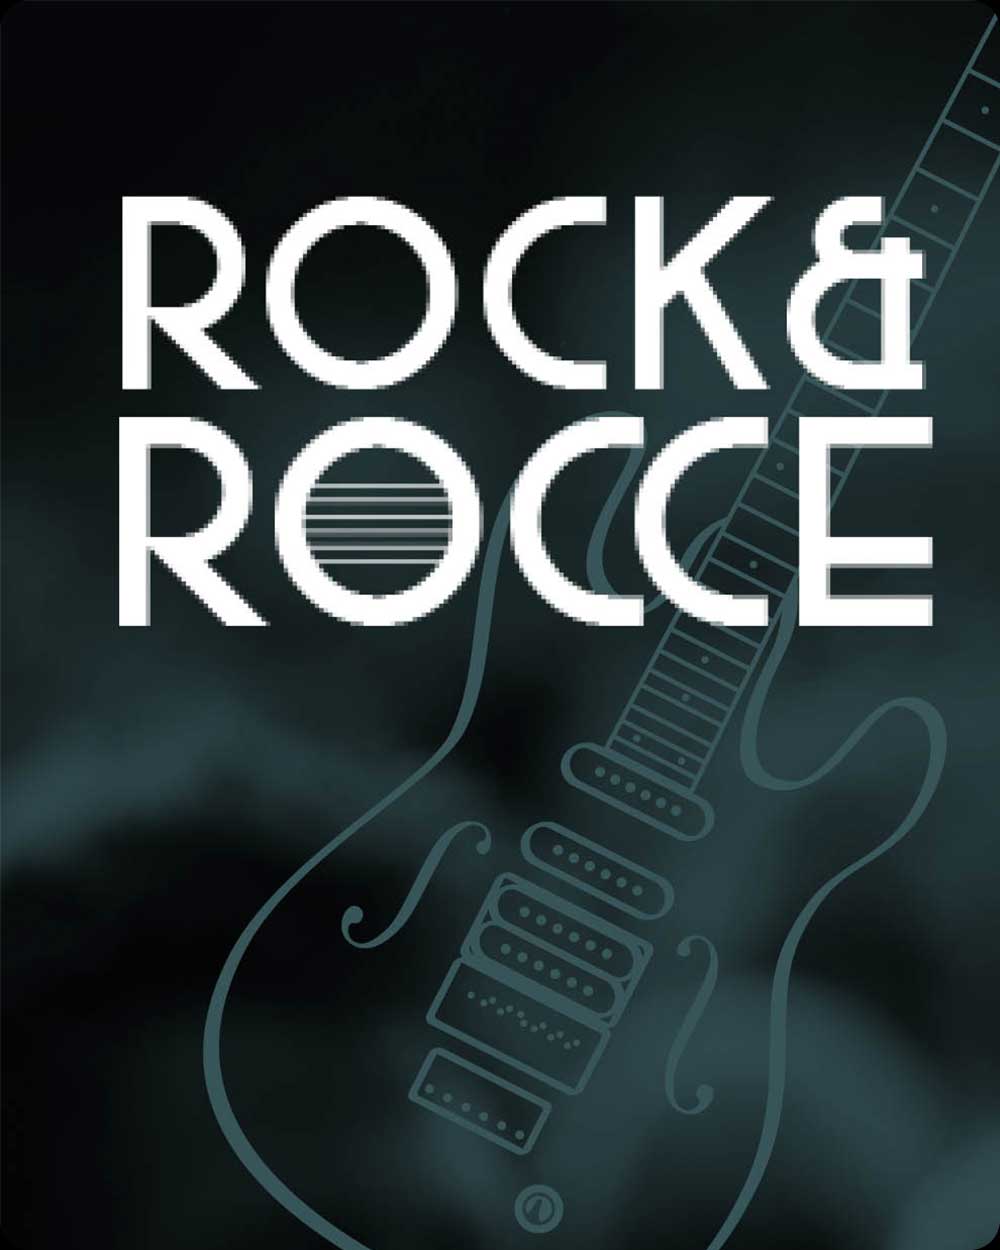 Rock & rocce